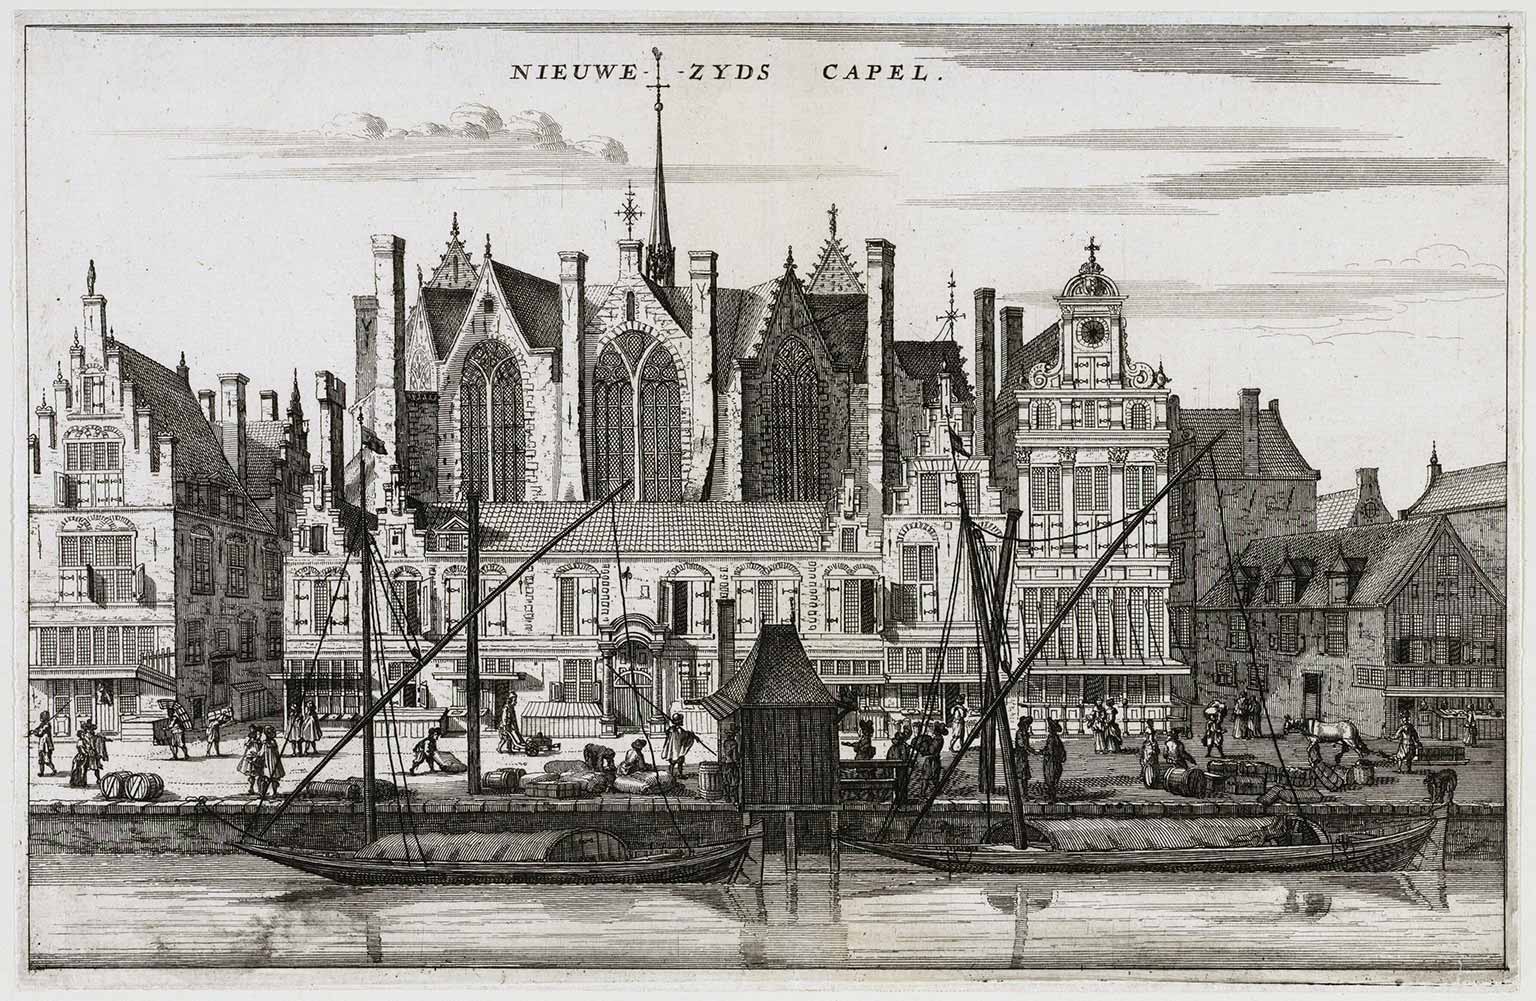 Engraving showing the Nieuwezijds Kapel in 1663, Rokin, Amsterdam, with ferries in front